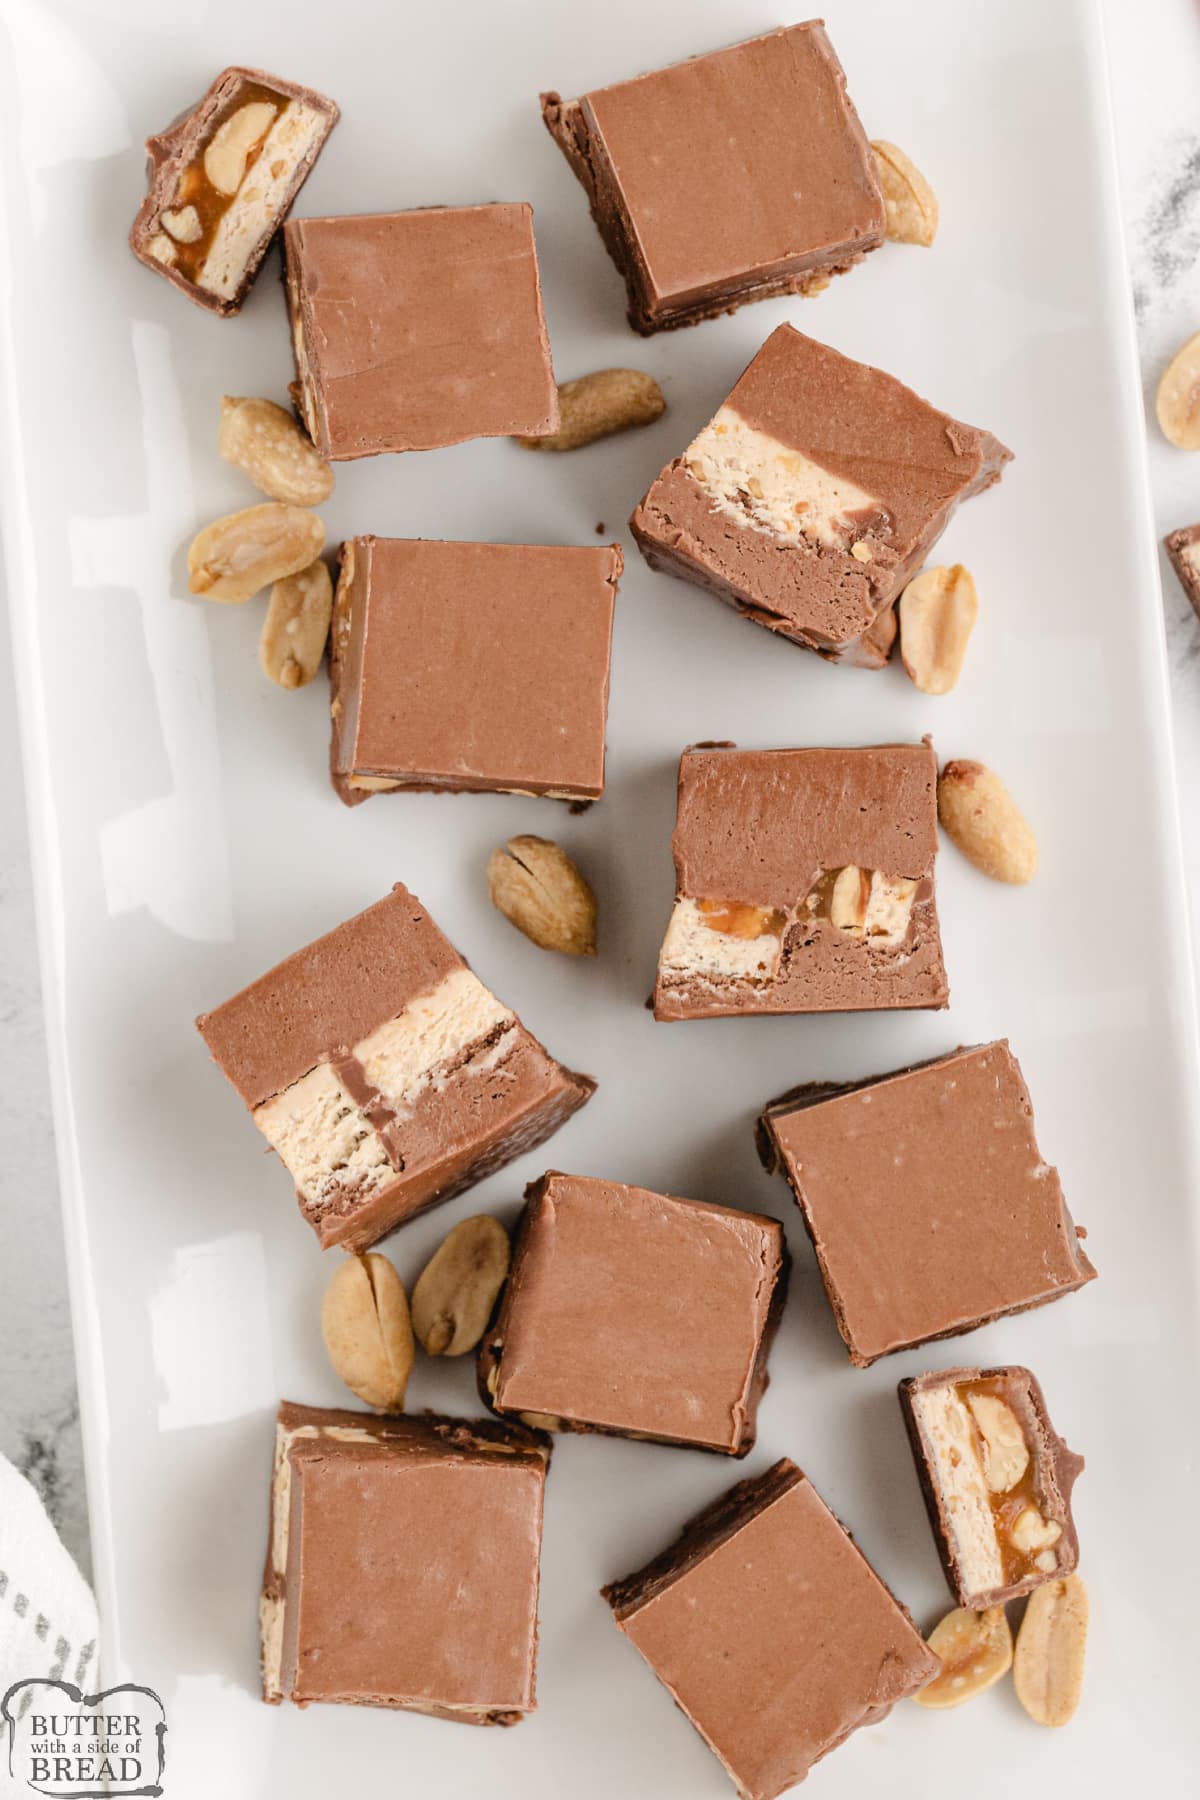 Chocolate fudge with sliced Snickers bars in the middle.